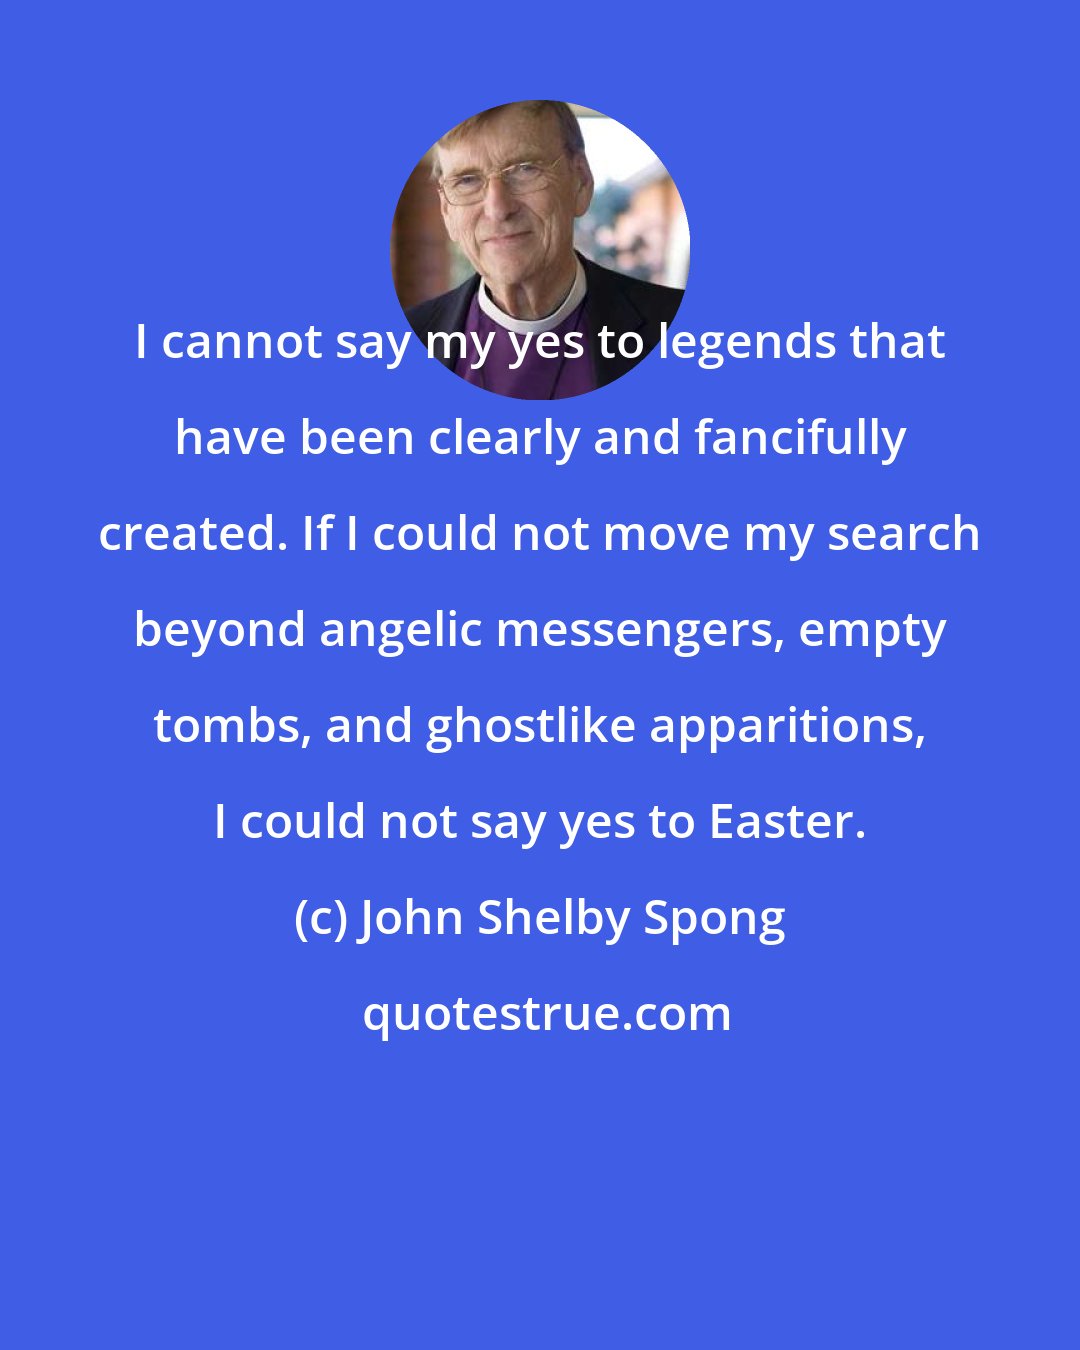 John Shelby Spong: I cannot say my yes to legends that have been clearly and fancifully created. If I could not move my search beyond angelic messengers, empty tombs, and ghostlike apparitions, I could not say yes to Easter.